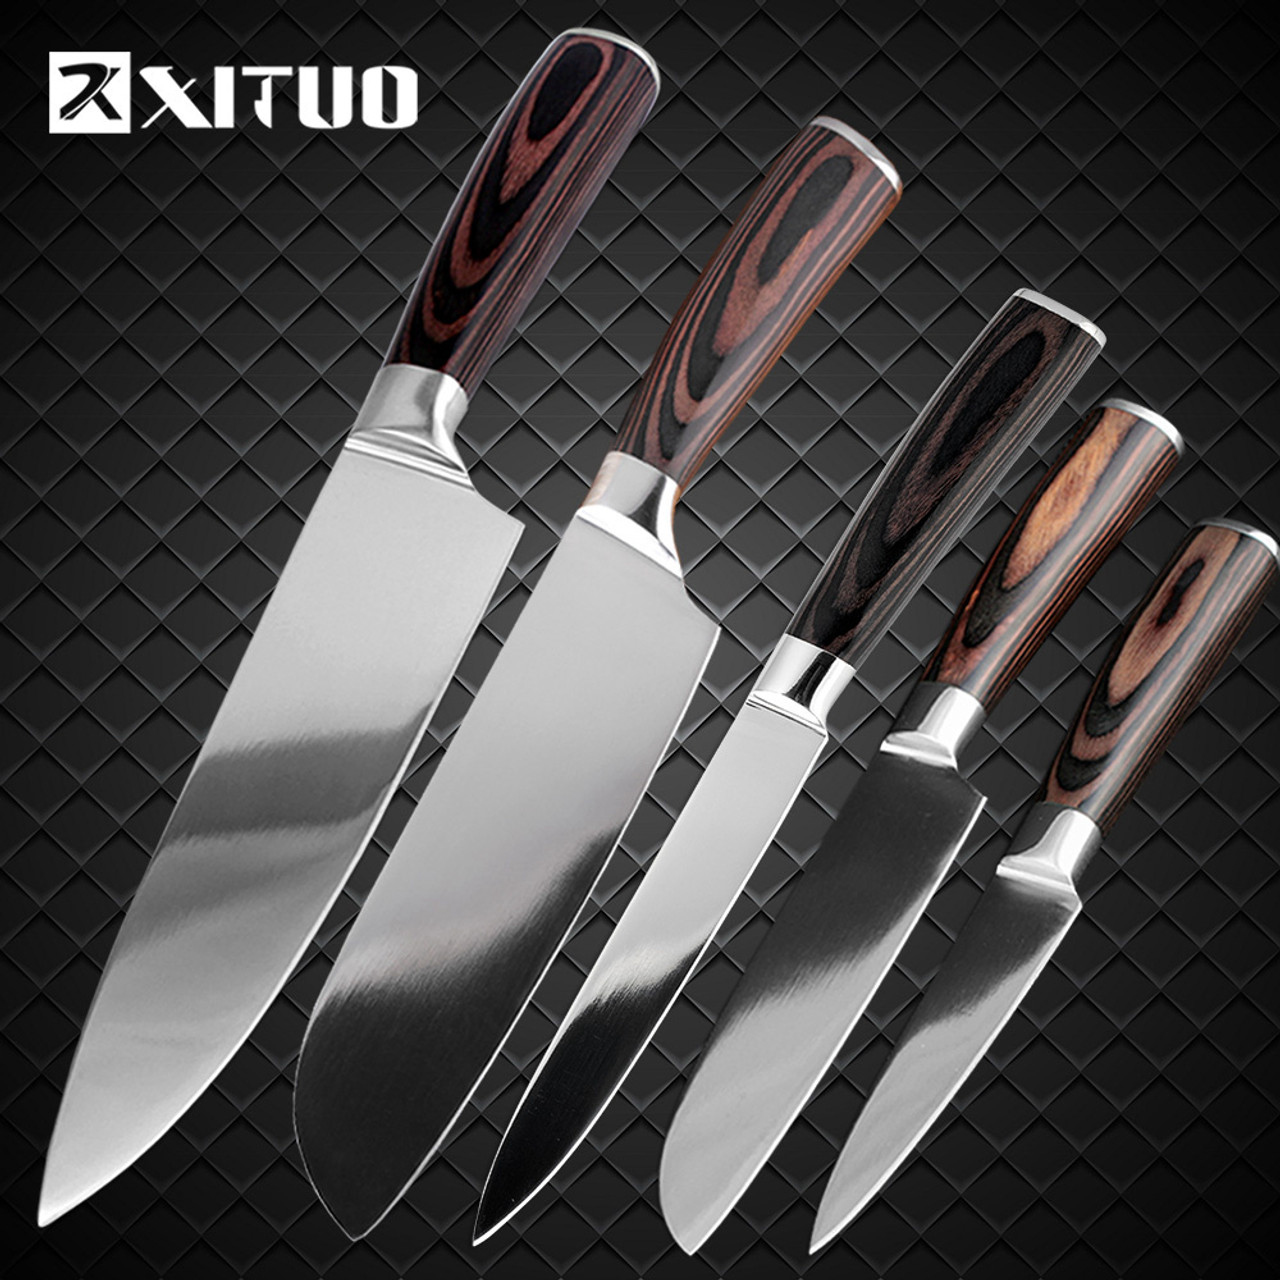 Xituo 5pcs Kitchen Knife Set Japanese Santoku Stainless Steel Kitchen Knives Chef Knife Sets Utility Paring Knives Cooking Tools Onshopdealscom